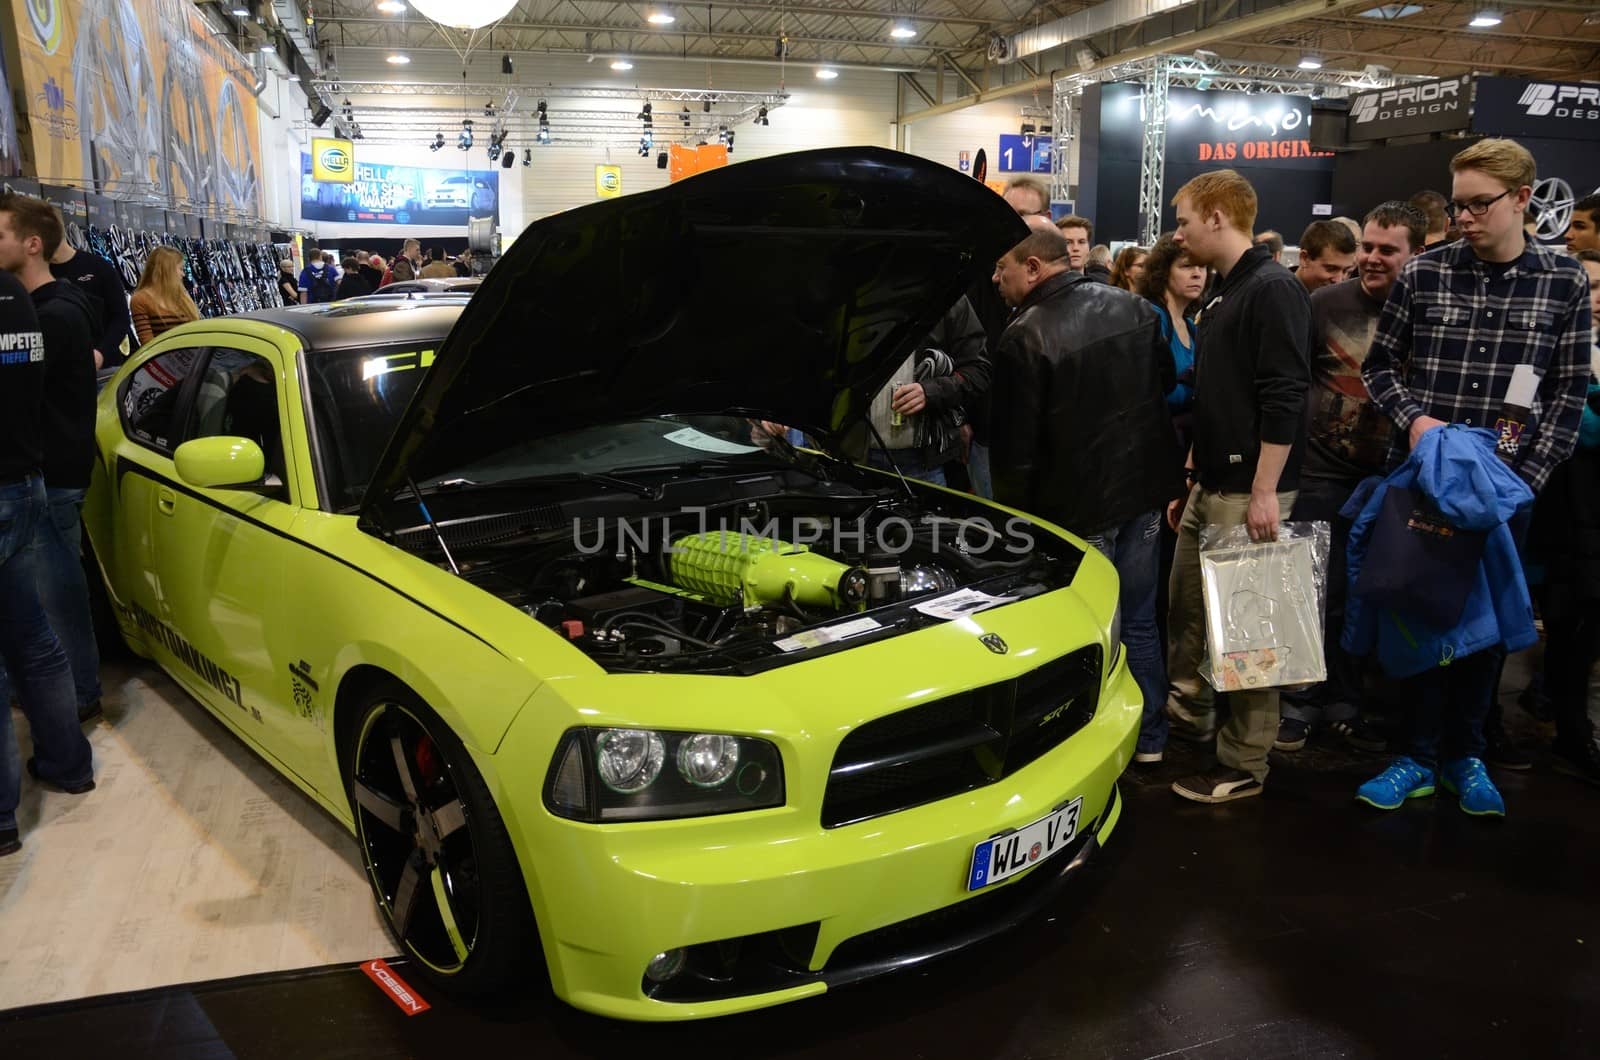 ESSEN, GERMANY - November 30: Customkingz shows their upgraded car and engine during Essen Motor Show in Germany, on November 30, 2013.